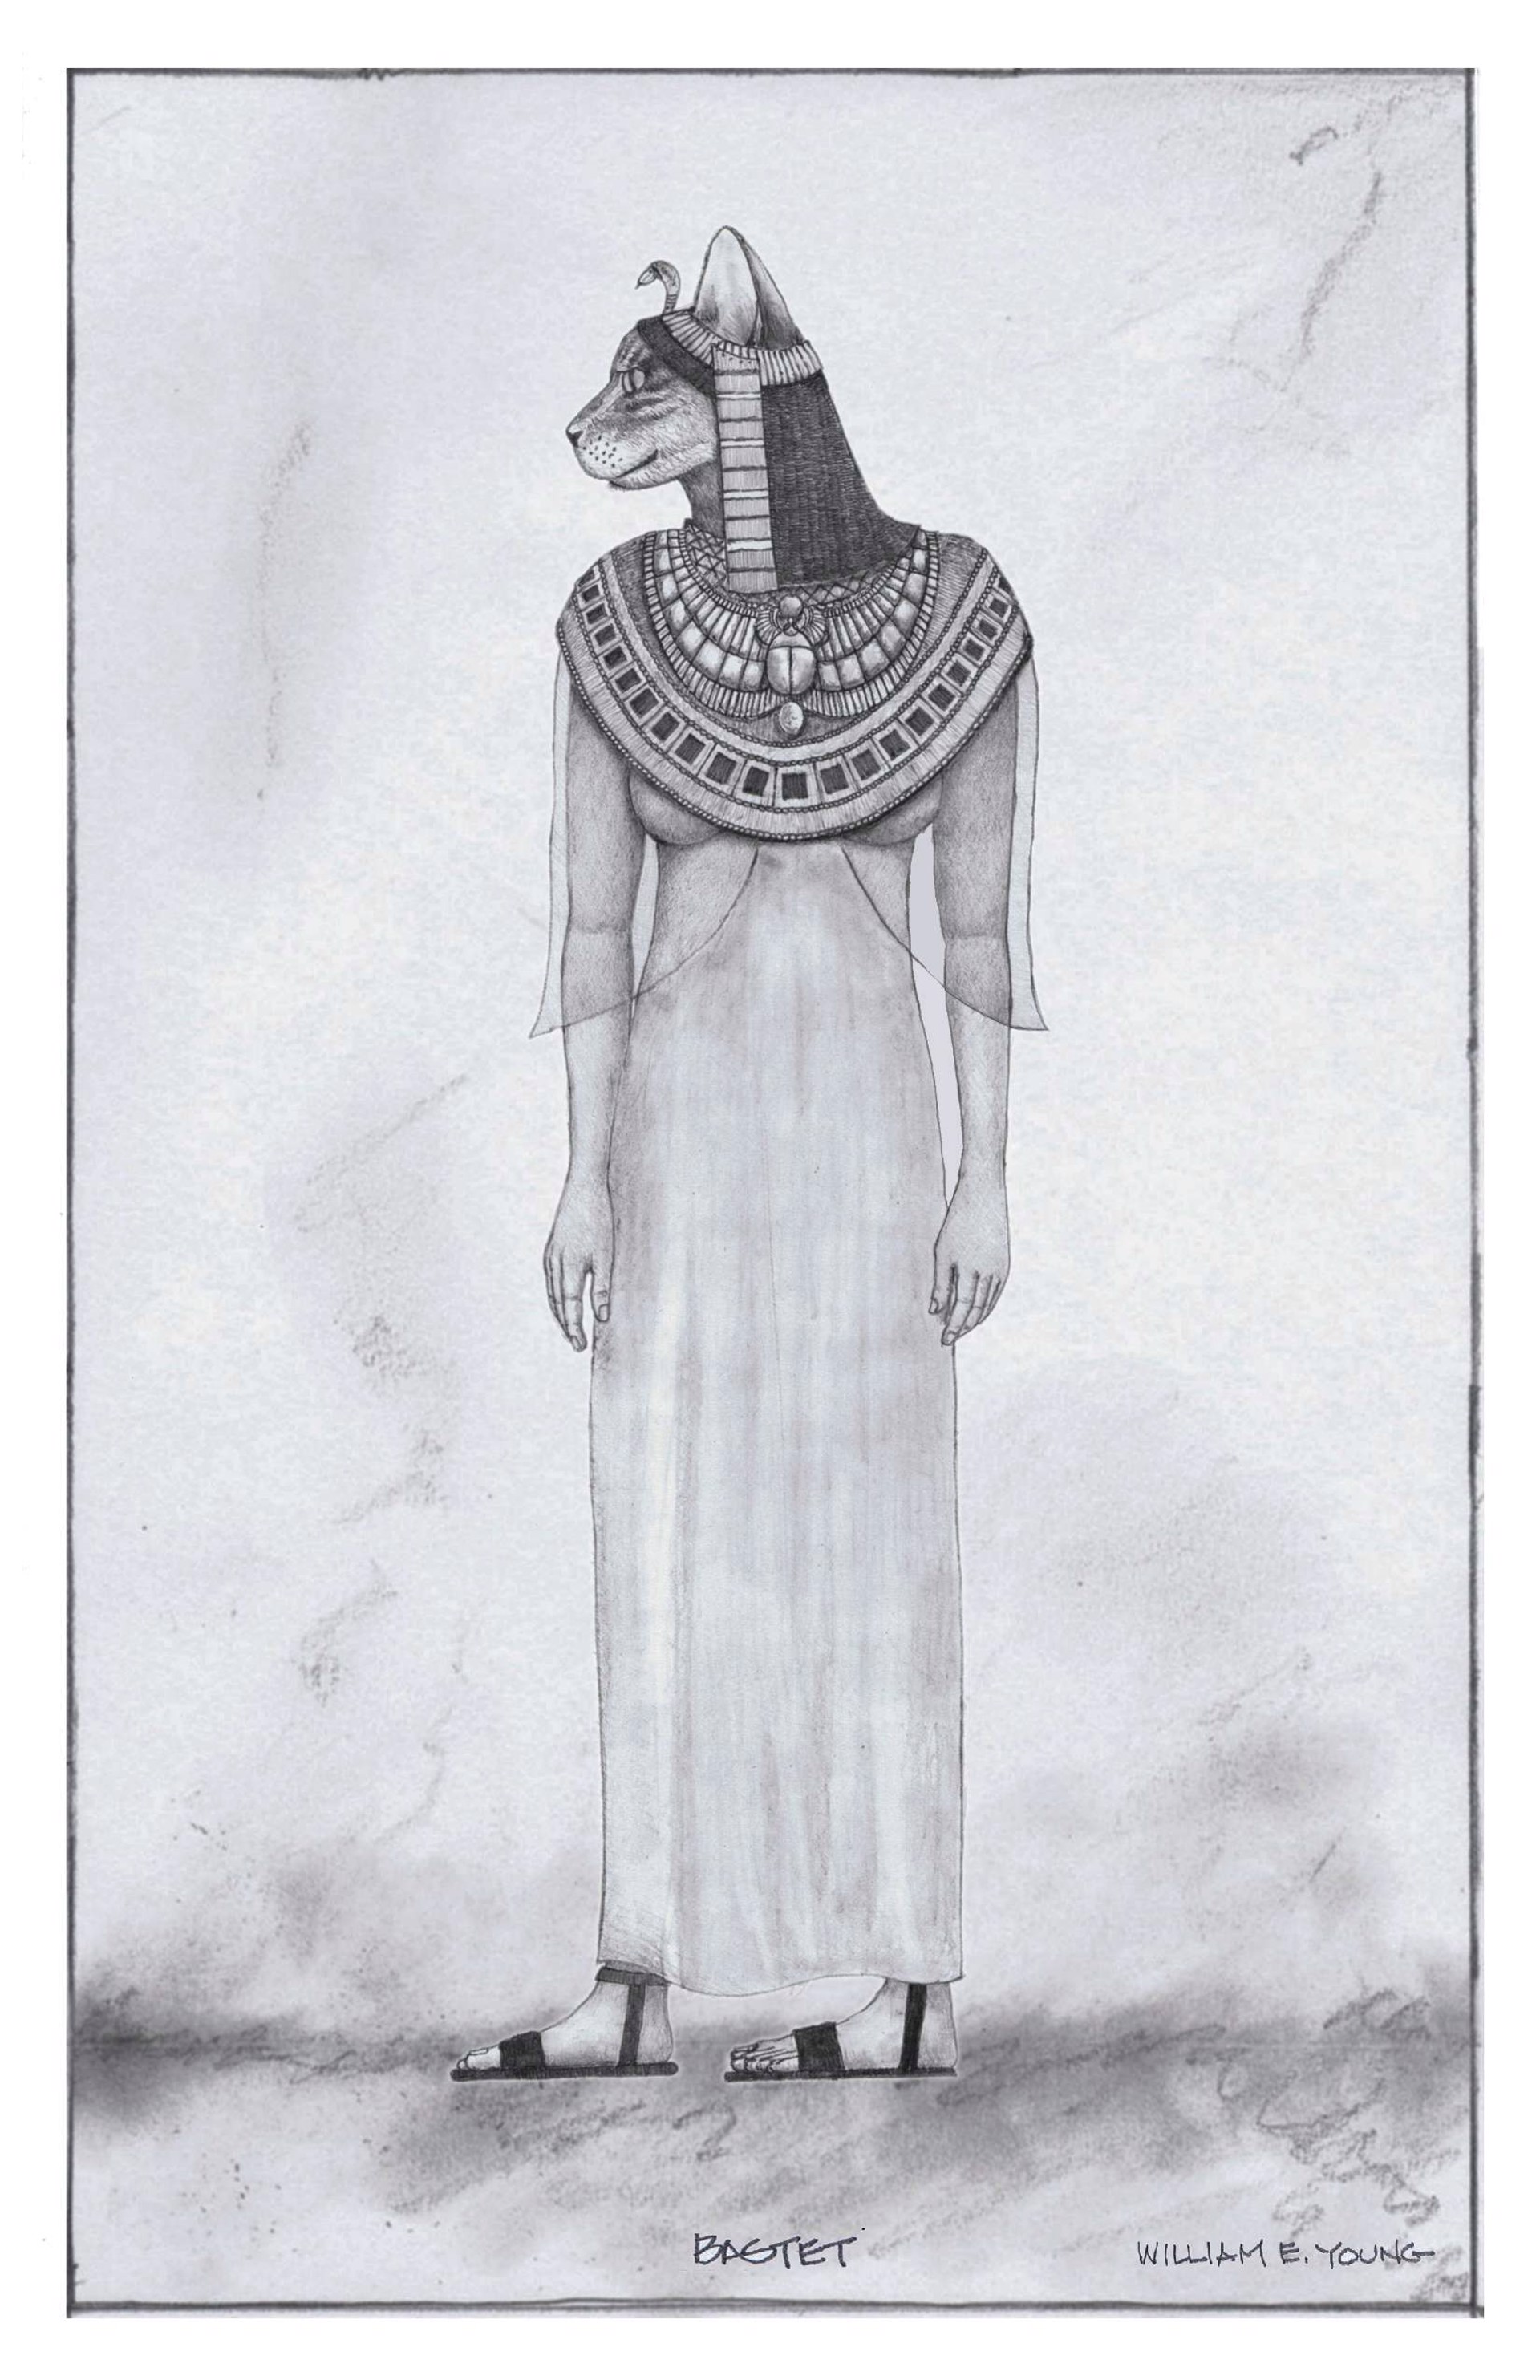 Bastet by William Young Prints